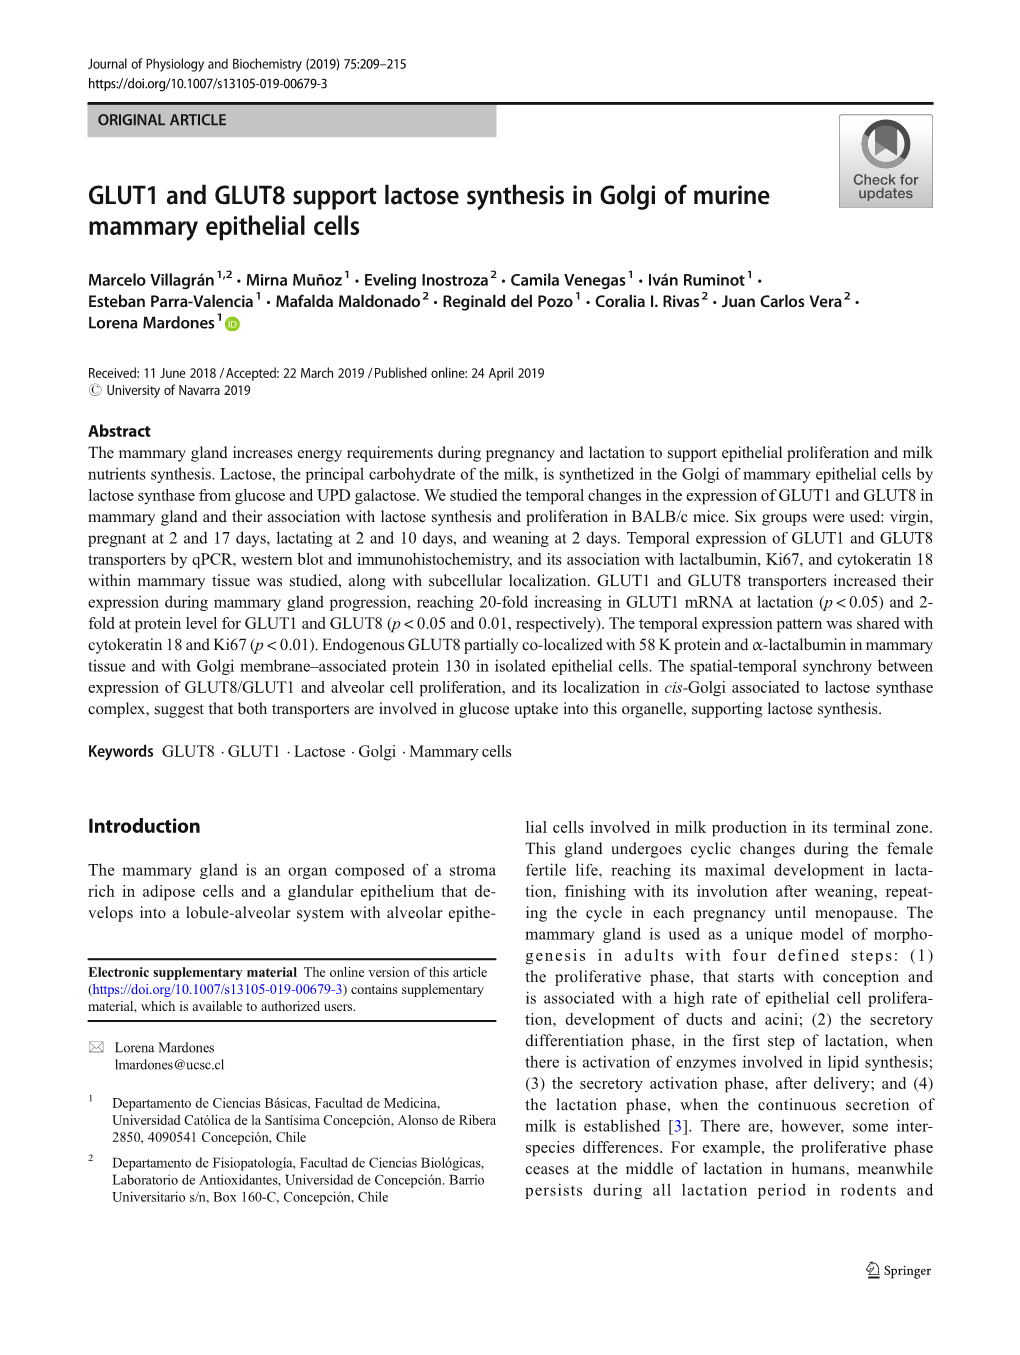 GLUT1 and GLUT8 Support Lactose Synthesis in Golgi of Murine Mammary Epithelial Cells